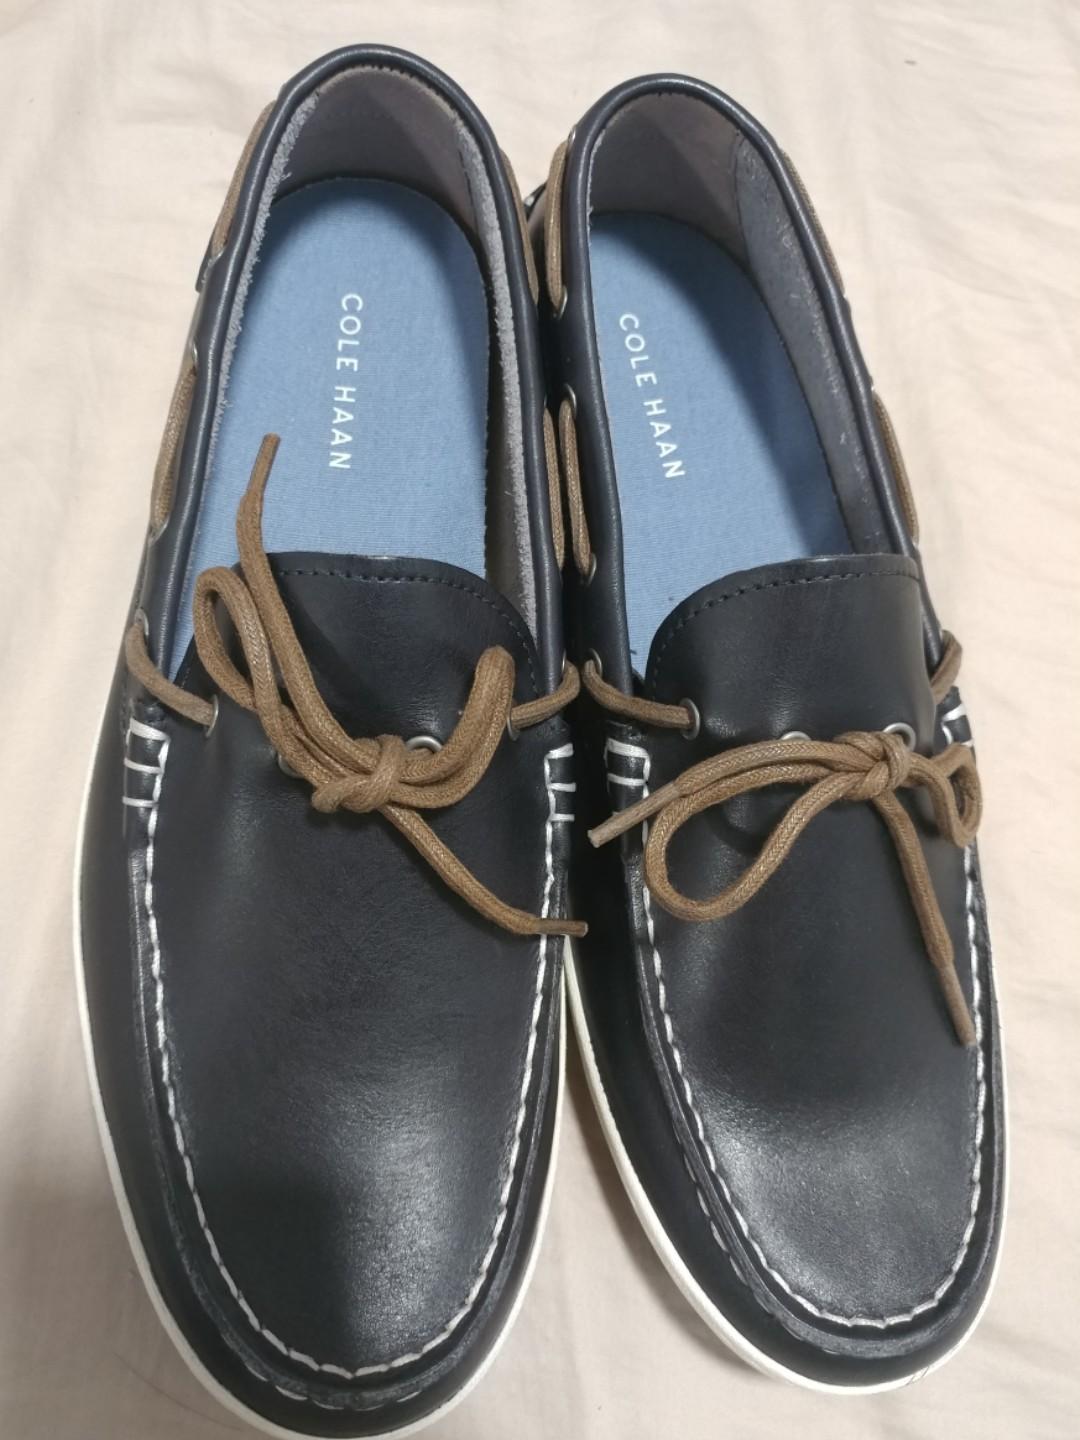 mens boat shoes size 11